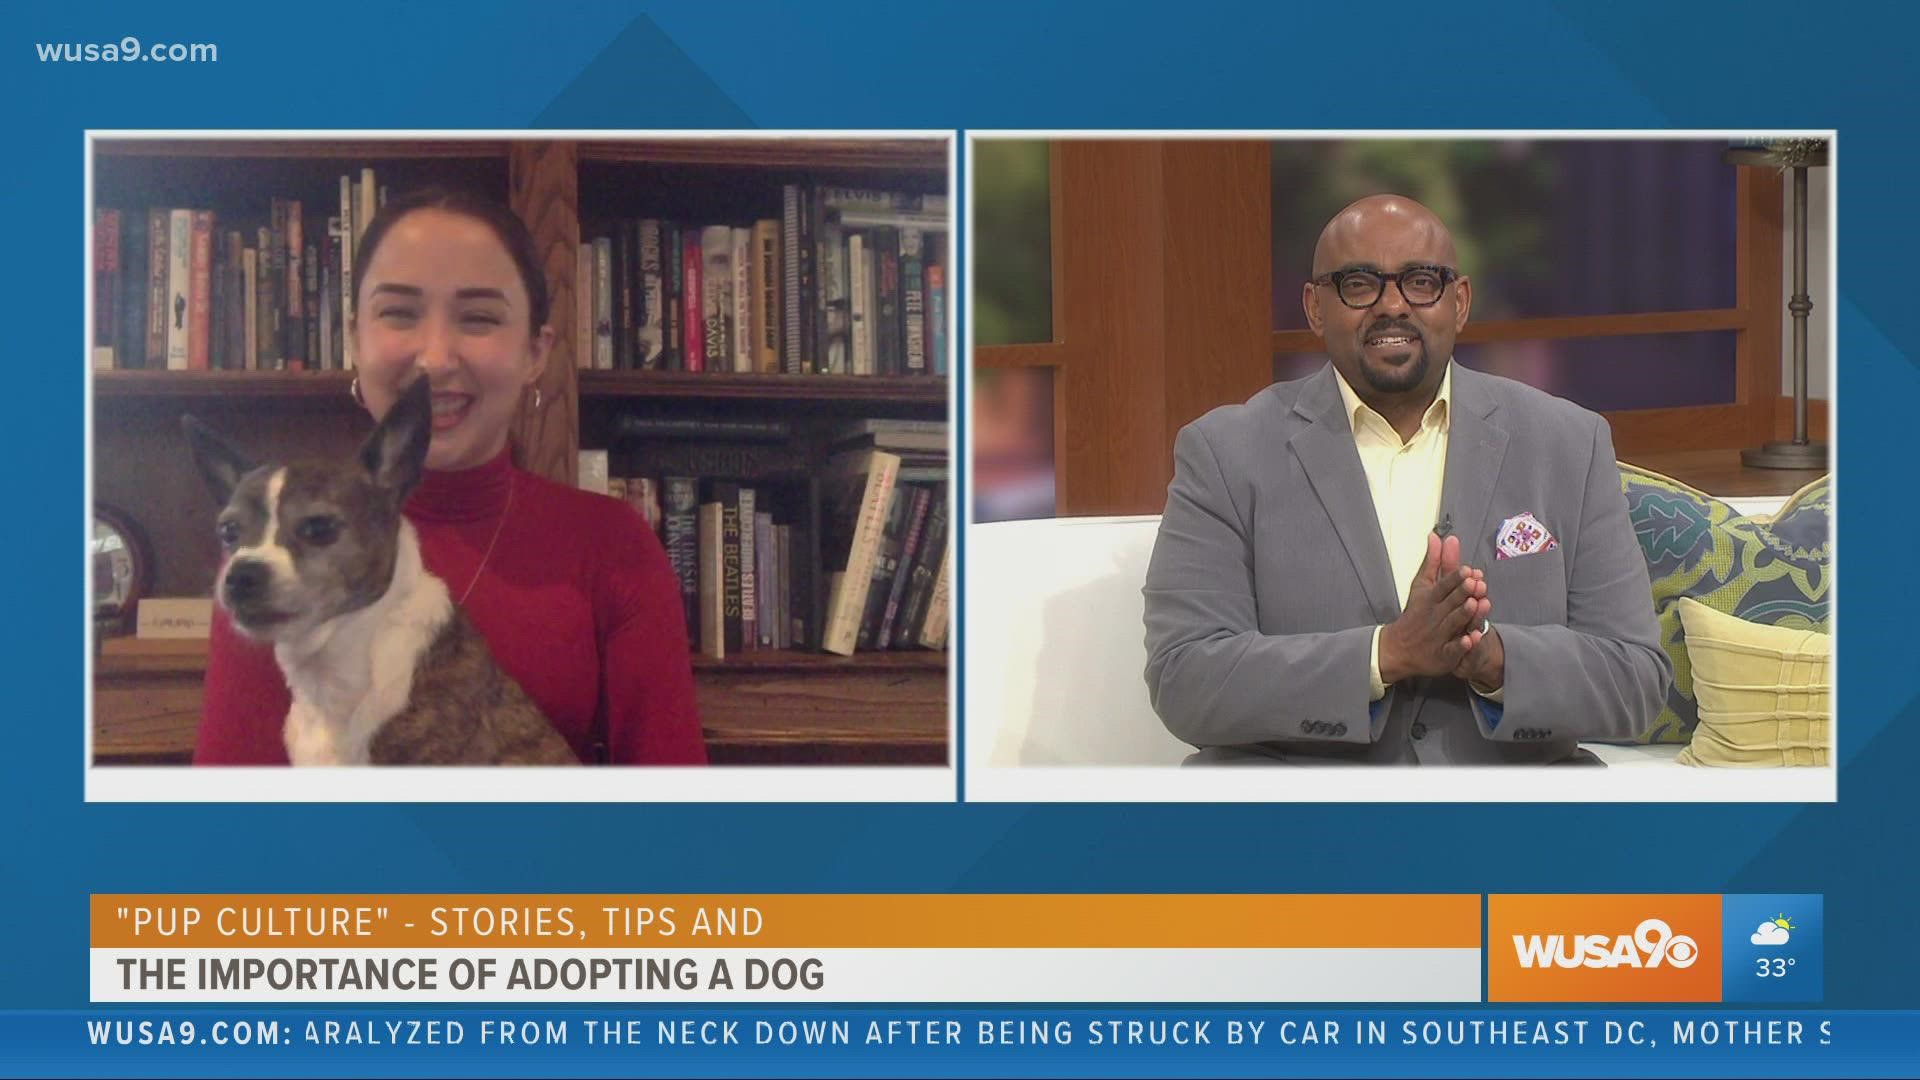 The holidays are a great time to adopt a puppy. Victoria Lily Shaffer, author of "Pup Culture", shares tips about adding a four legged friend to your family.